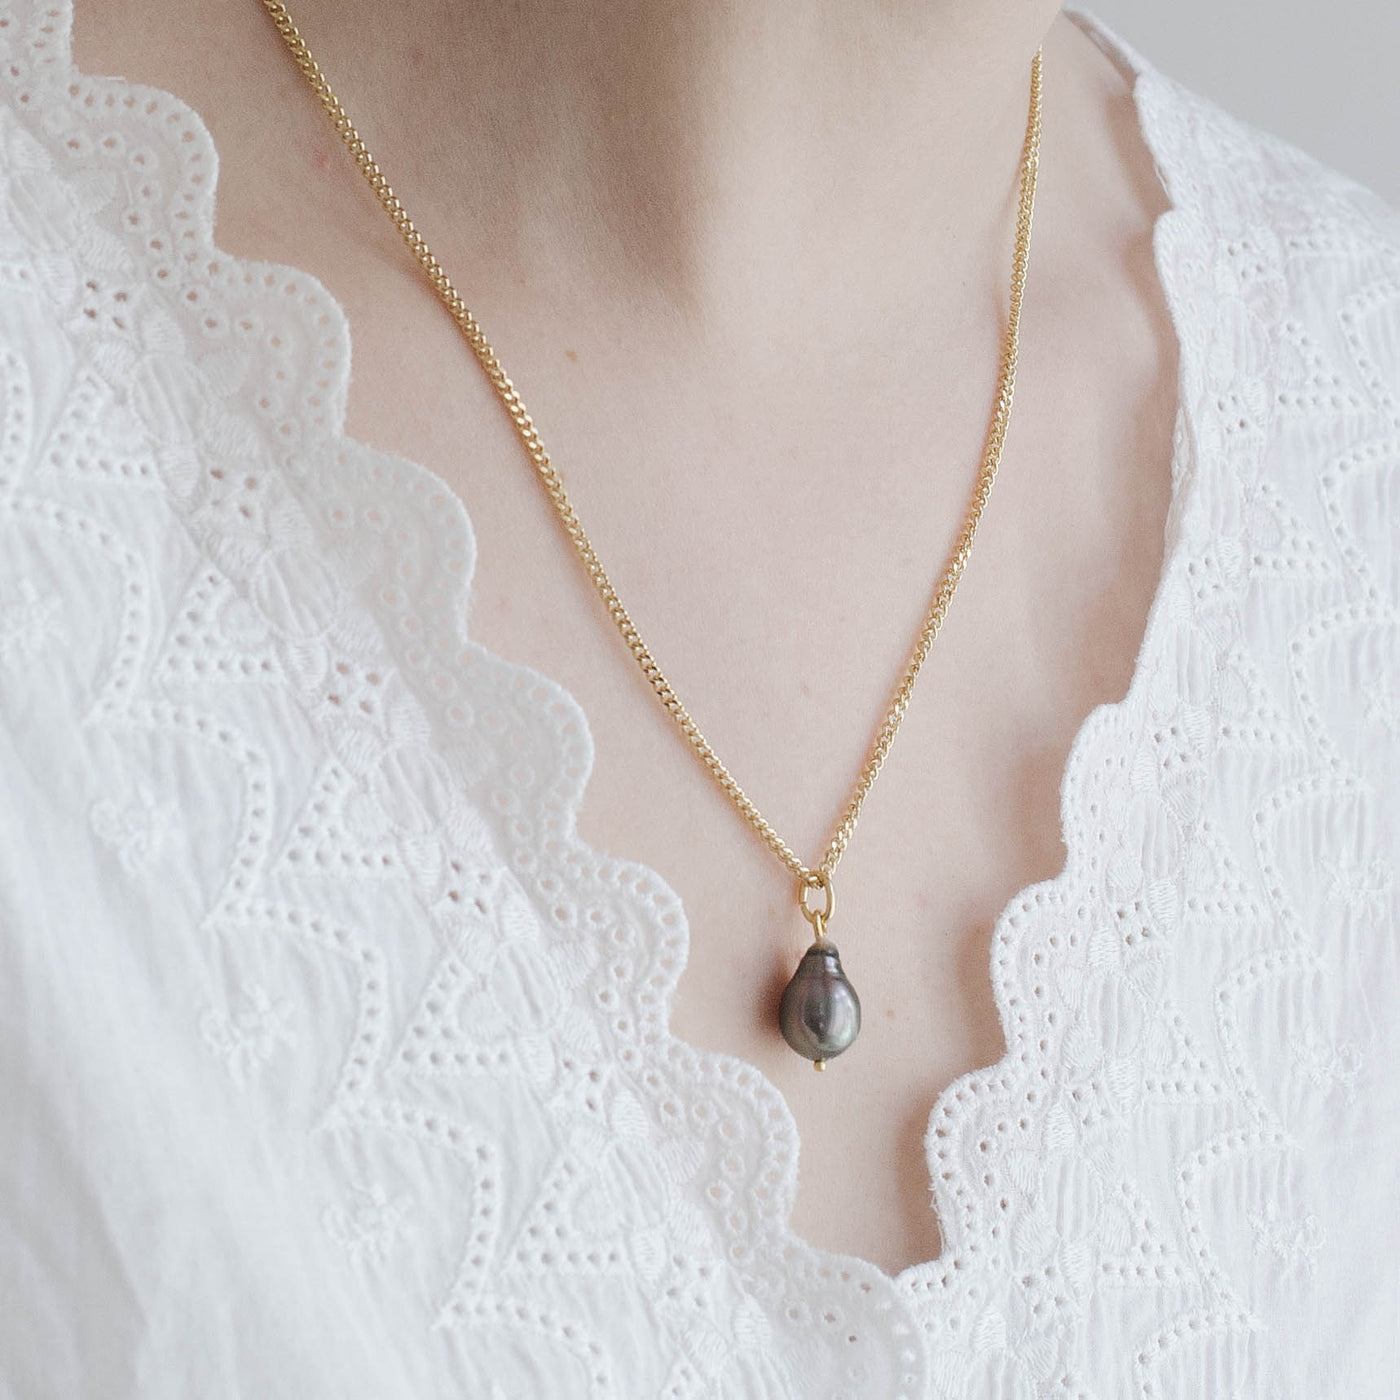 Jewelry Set // FJELLSTRAND Midnight Earrings x NYTORP Necklace Gold Plated